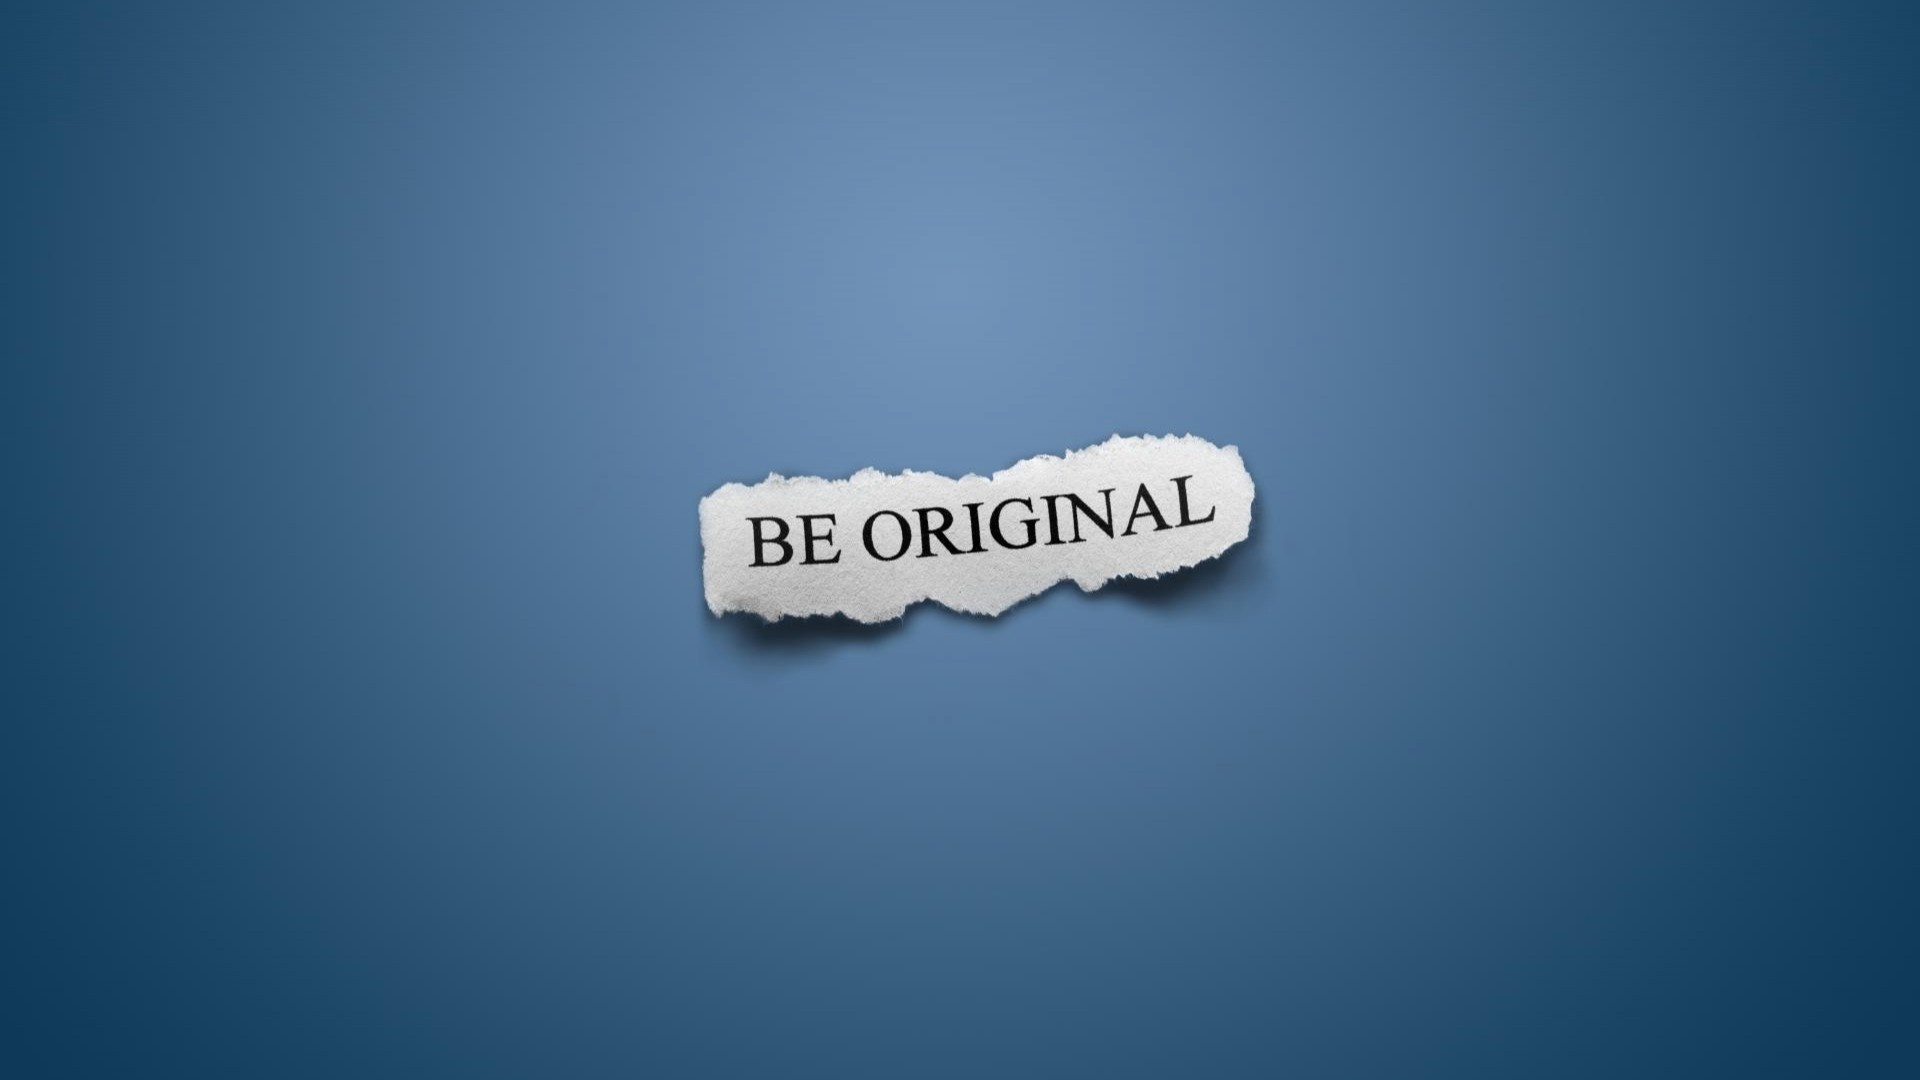 General 1920x1080 minimalism simple background blue background typography